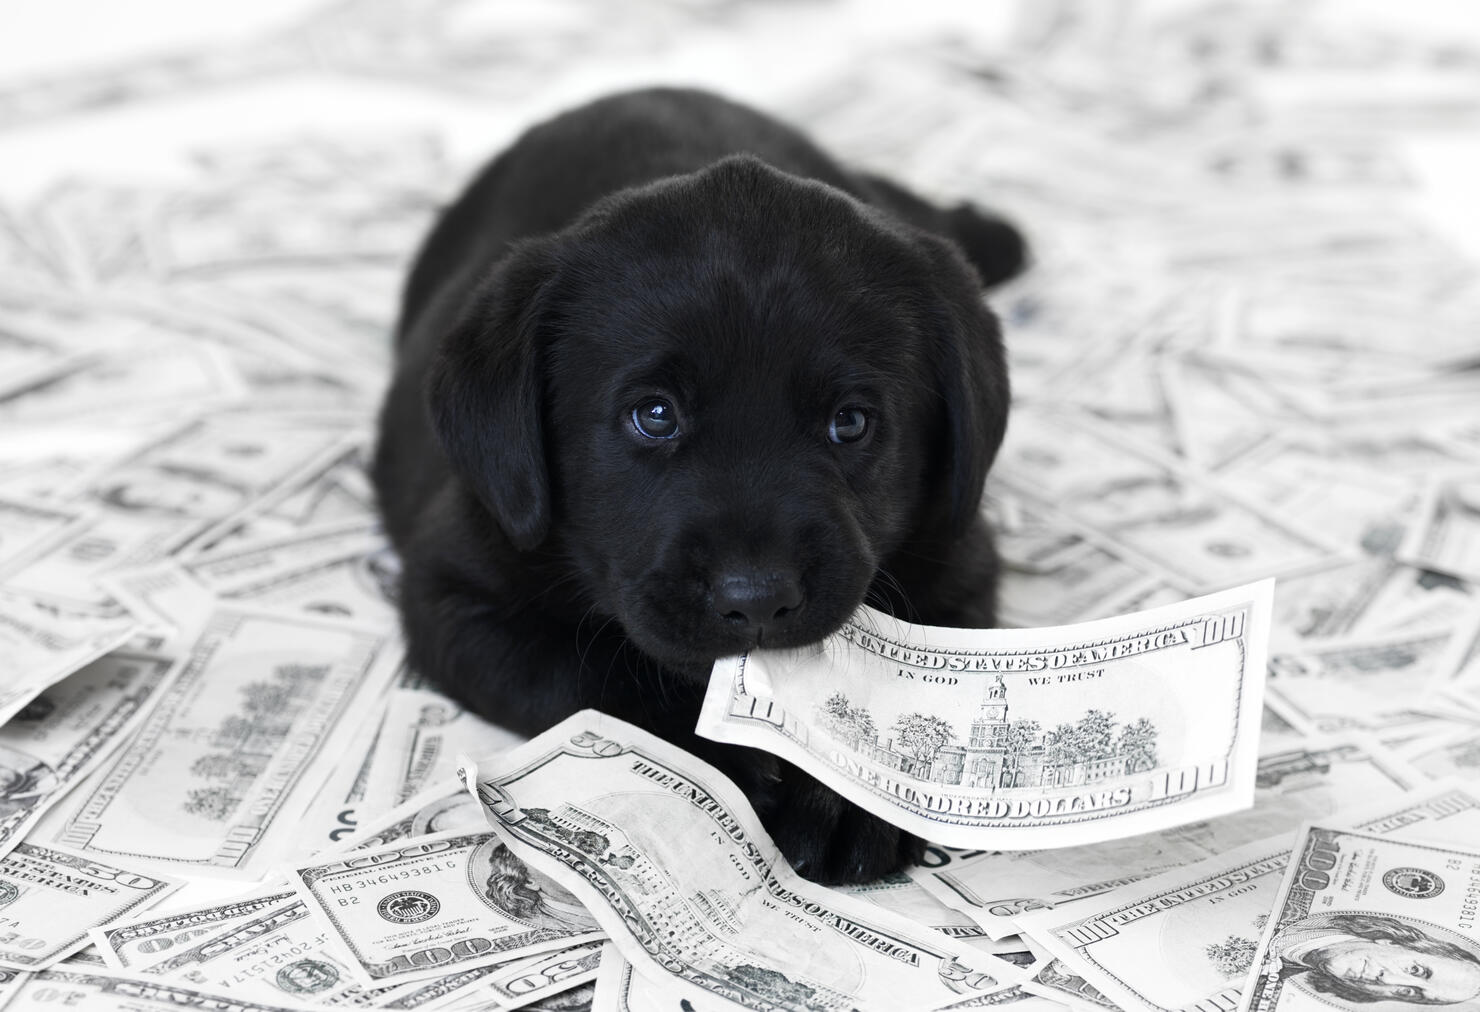 Having a pet can be expensive